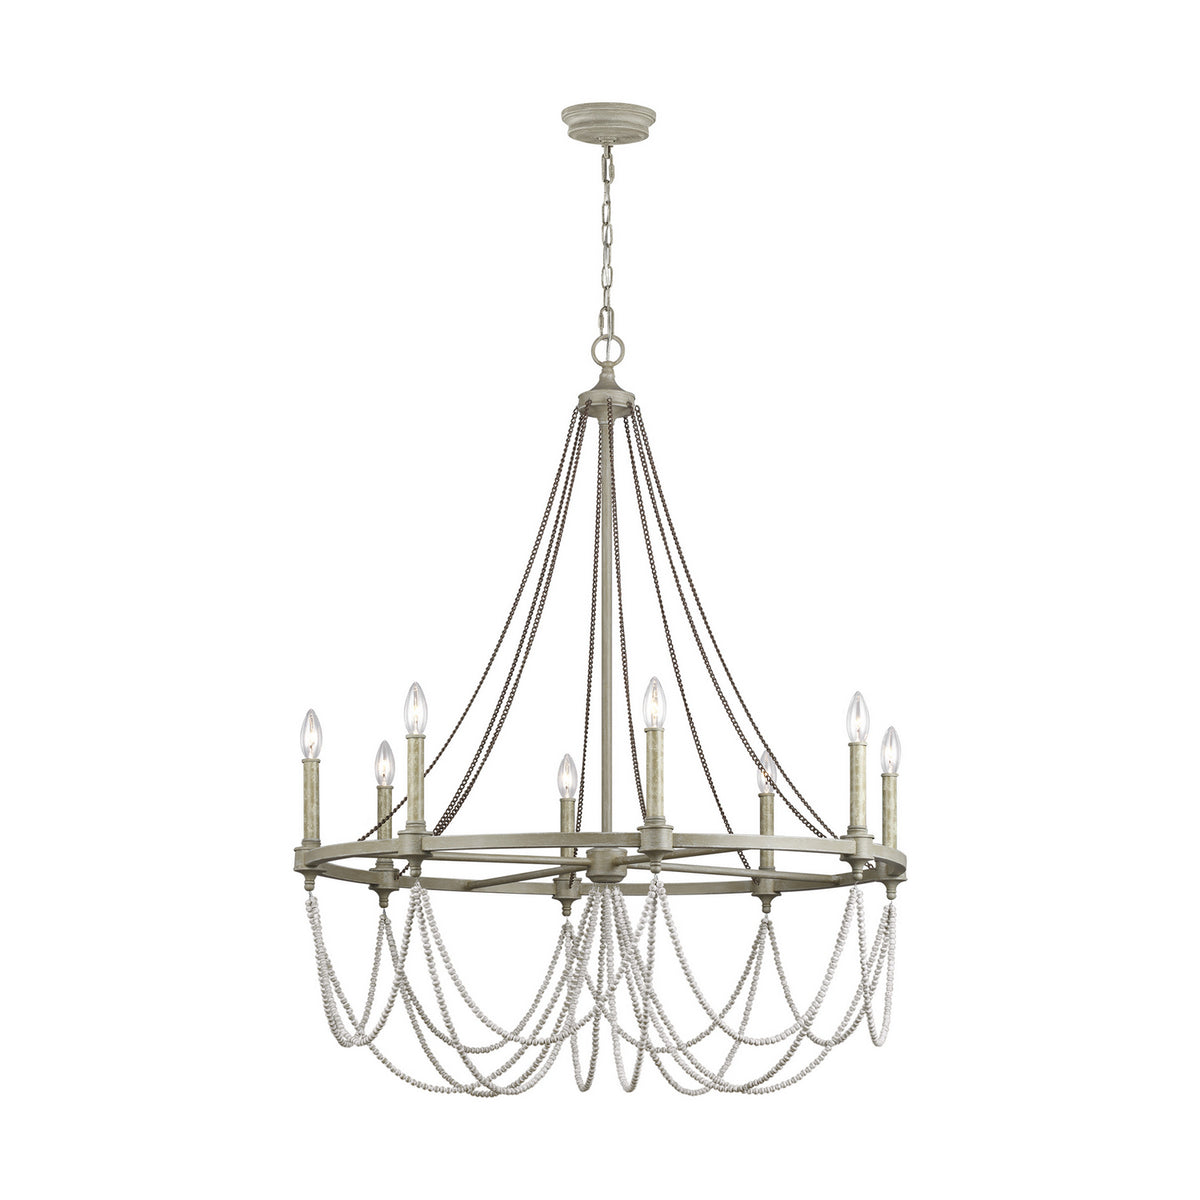 Visual Comfort Studio Canada - F3332/8FWO/DWW - Eight Light Chandelier - Beverly - French Washed Oak / Distressed White Wood